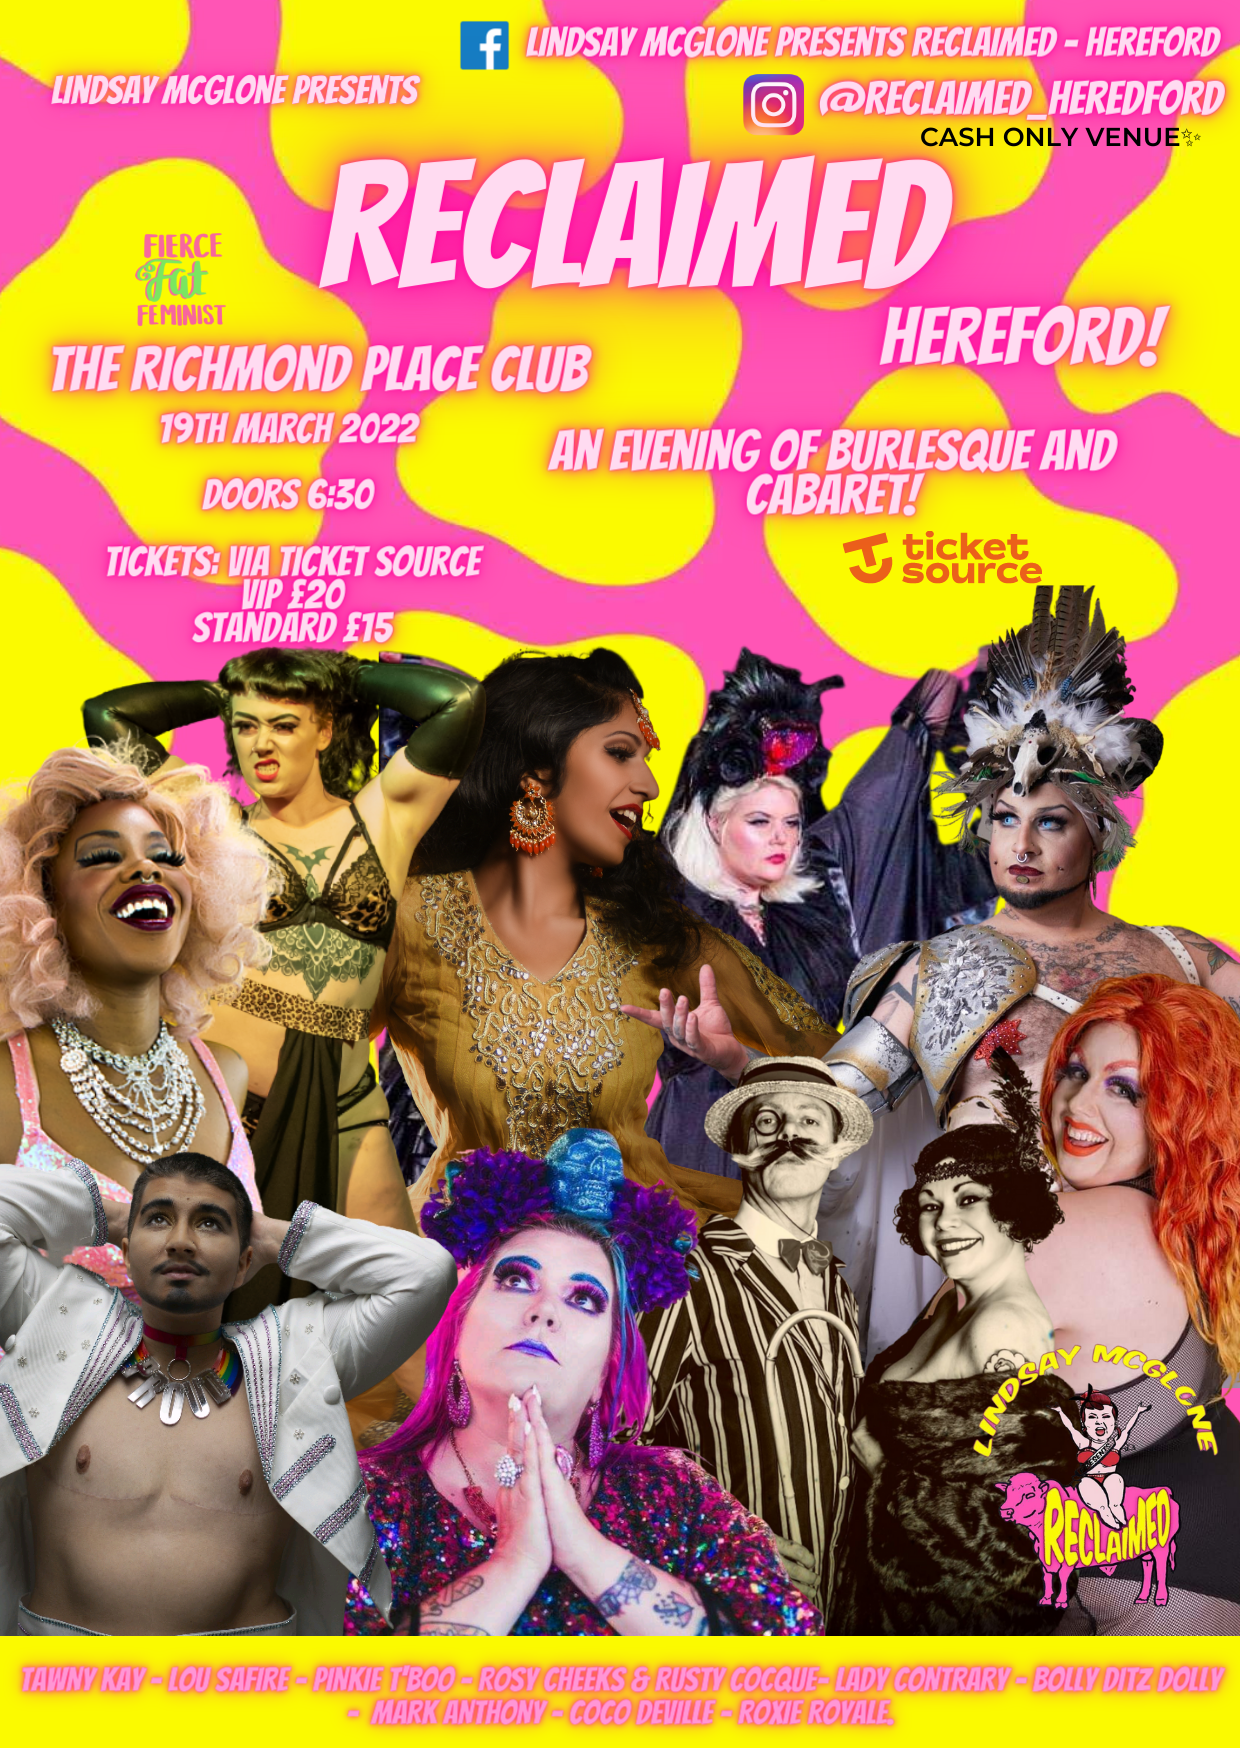 WHAT’S ON? | Burlesque producer brings burlesque back to Hereford in bid to create more inclusive and diverse spaces